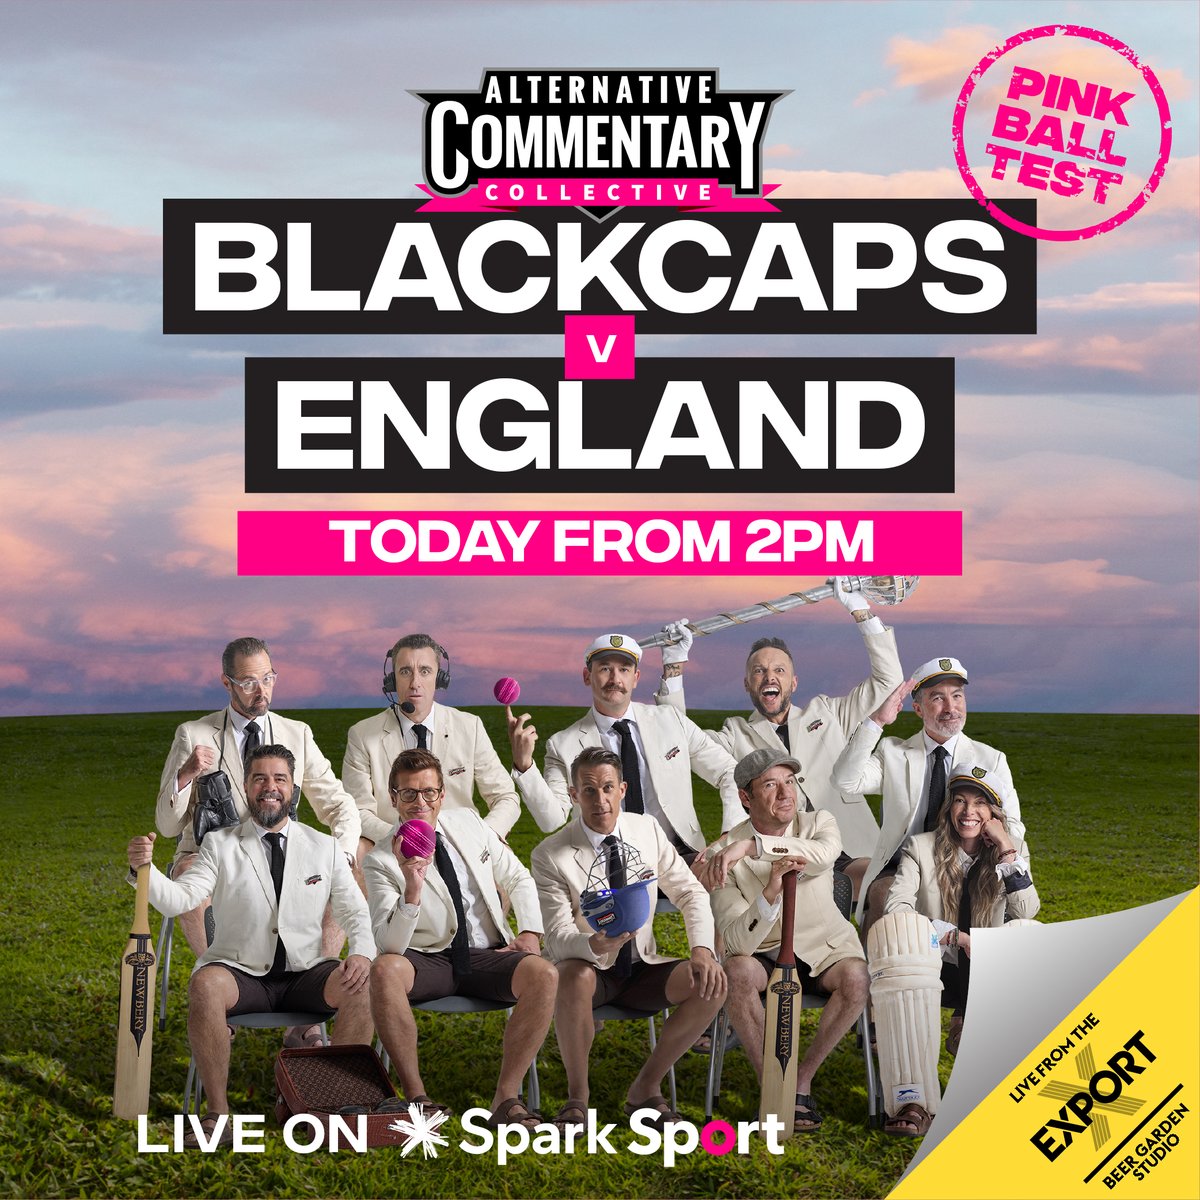 Test cricket is back!!! Join us live from the Export Beer Garden Studio for coverage of the Pink Ball Test between our Black Caps & England! Coverage exclusively on @sparknzsport from 2pm today! Sign up now at sparksport.co.nz